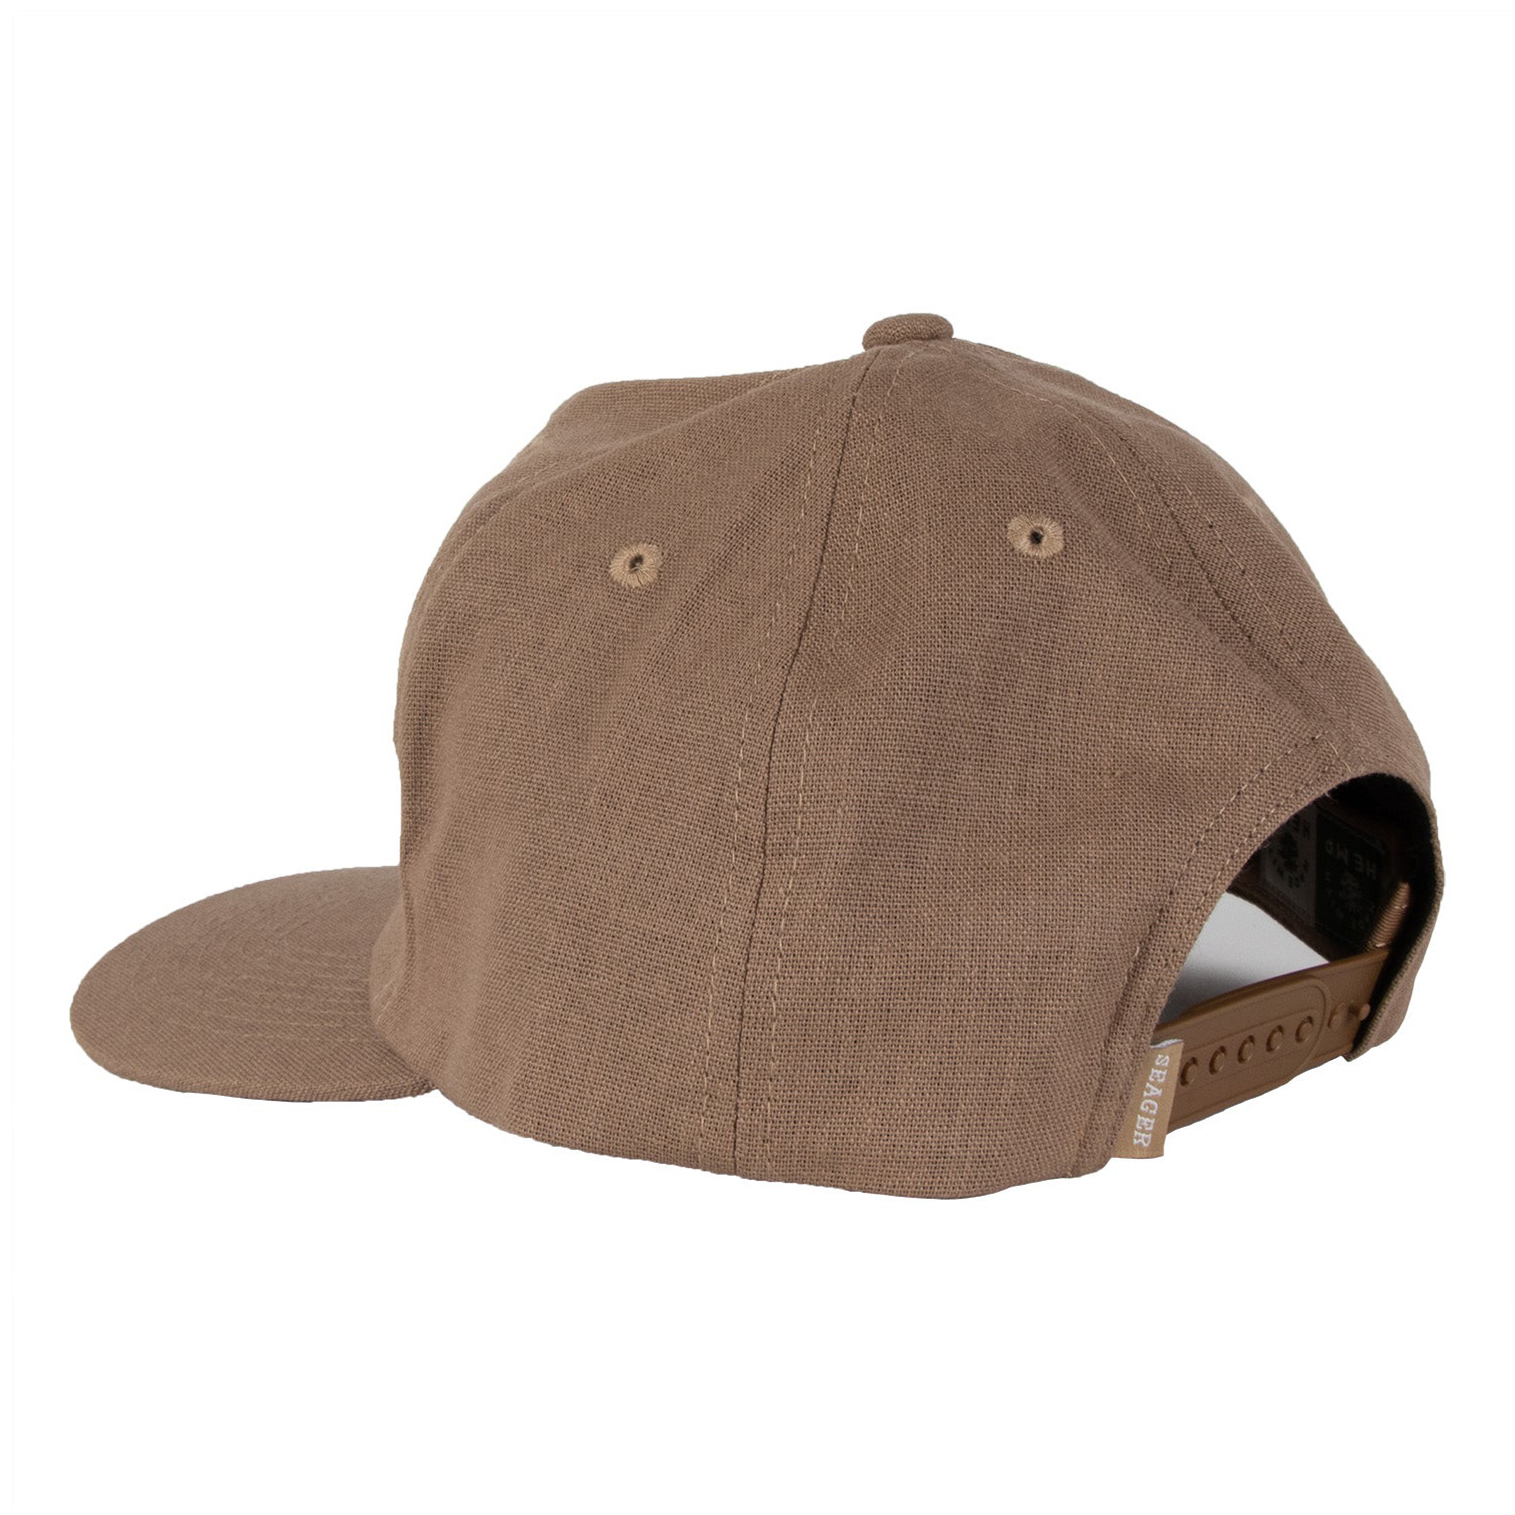 Seager Co. Ramblin Man Hemp Snapback - Coyote Brown | undefined ...